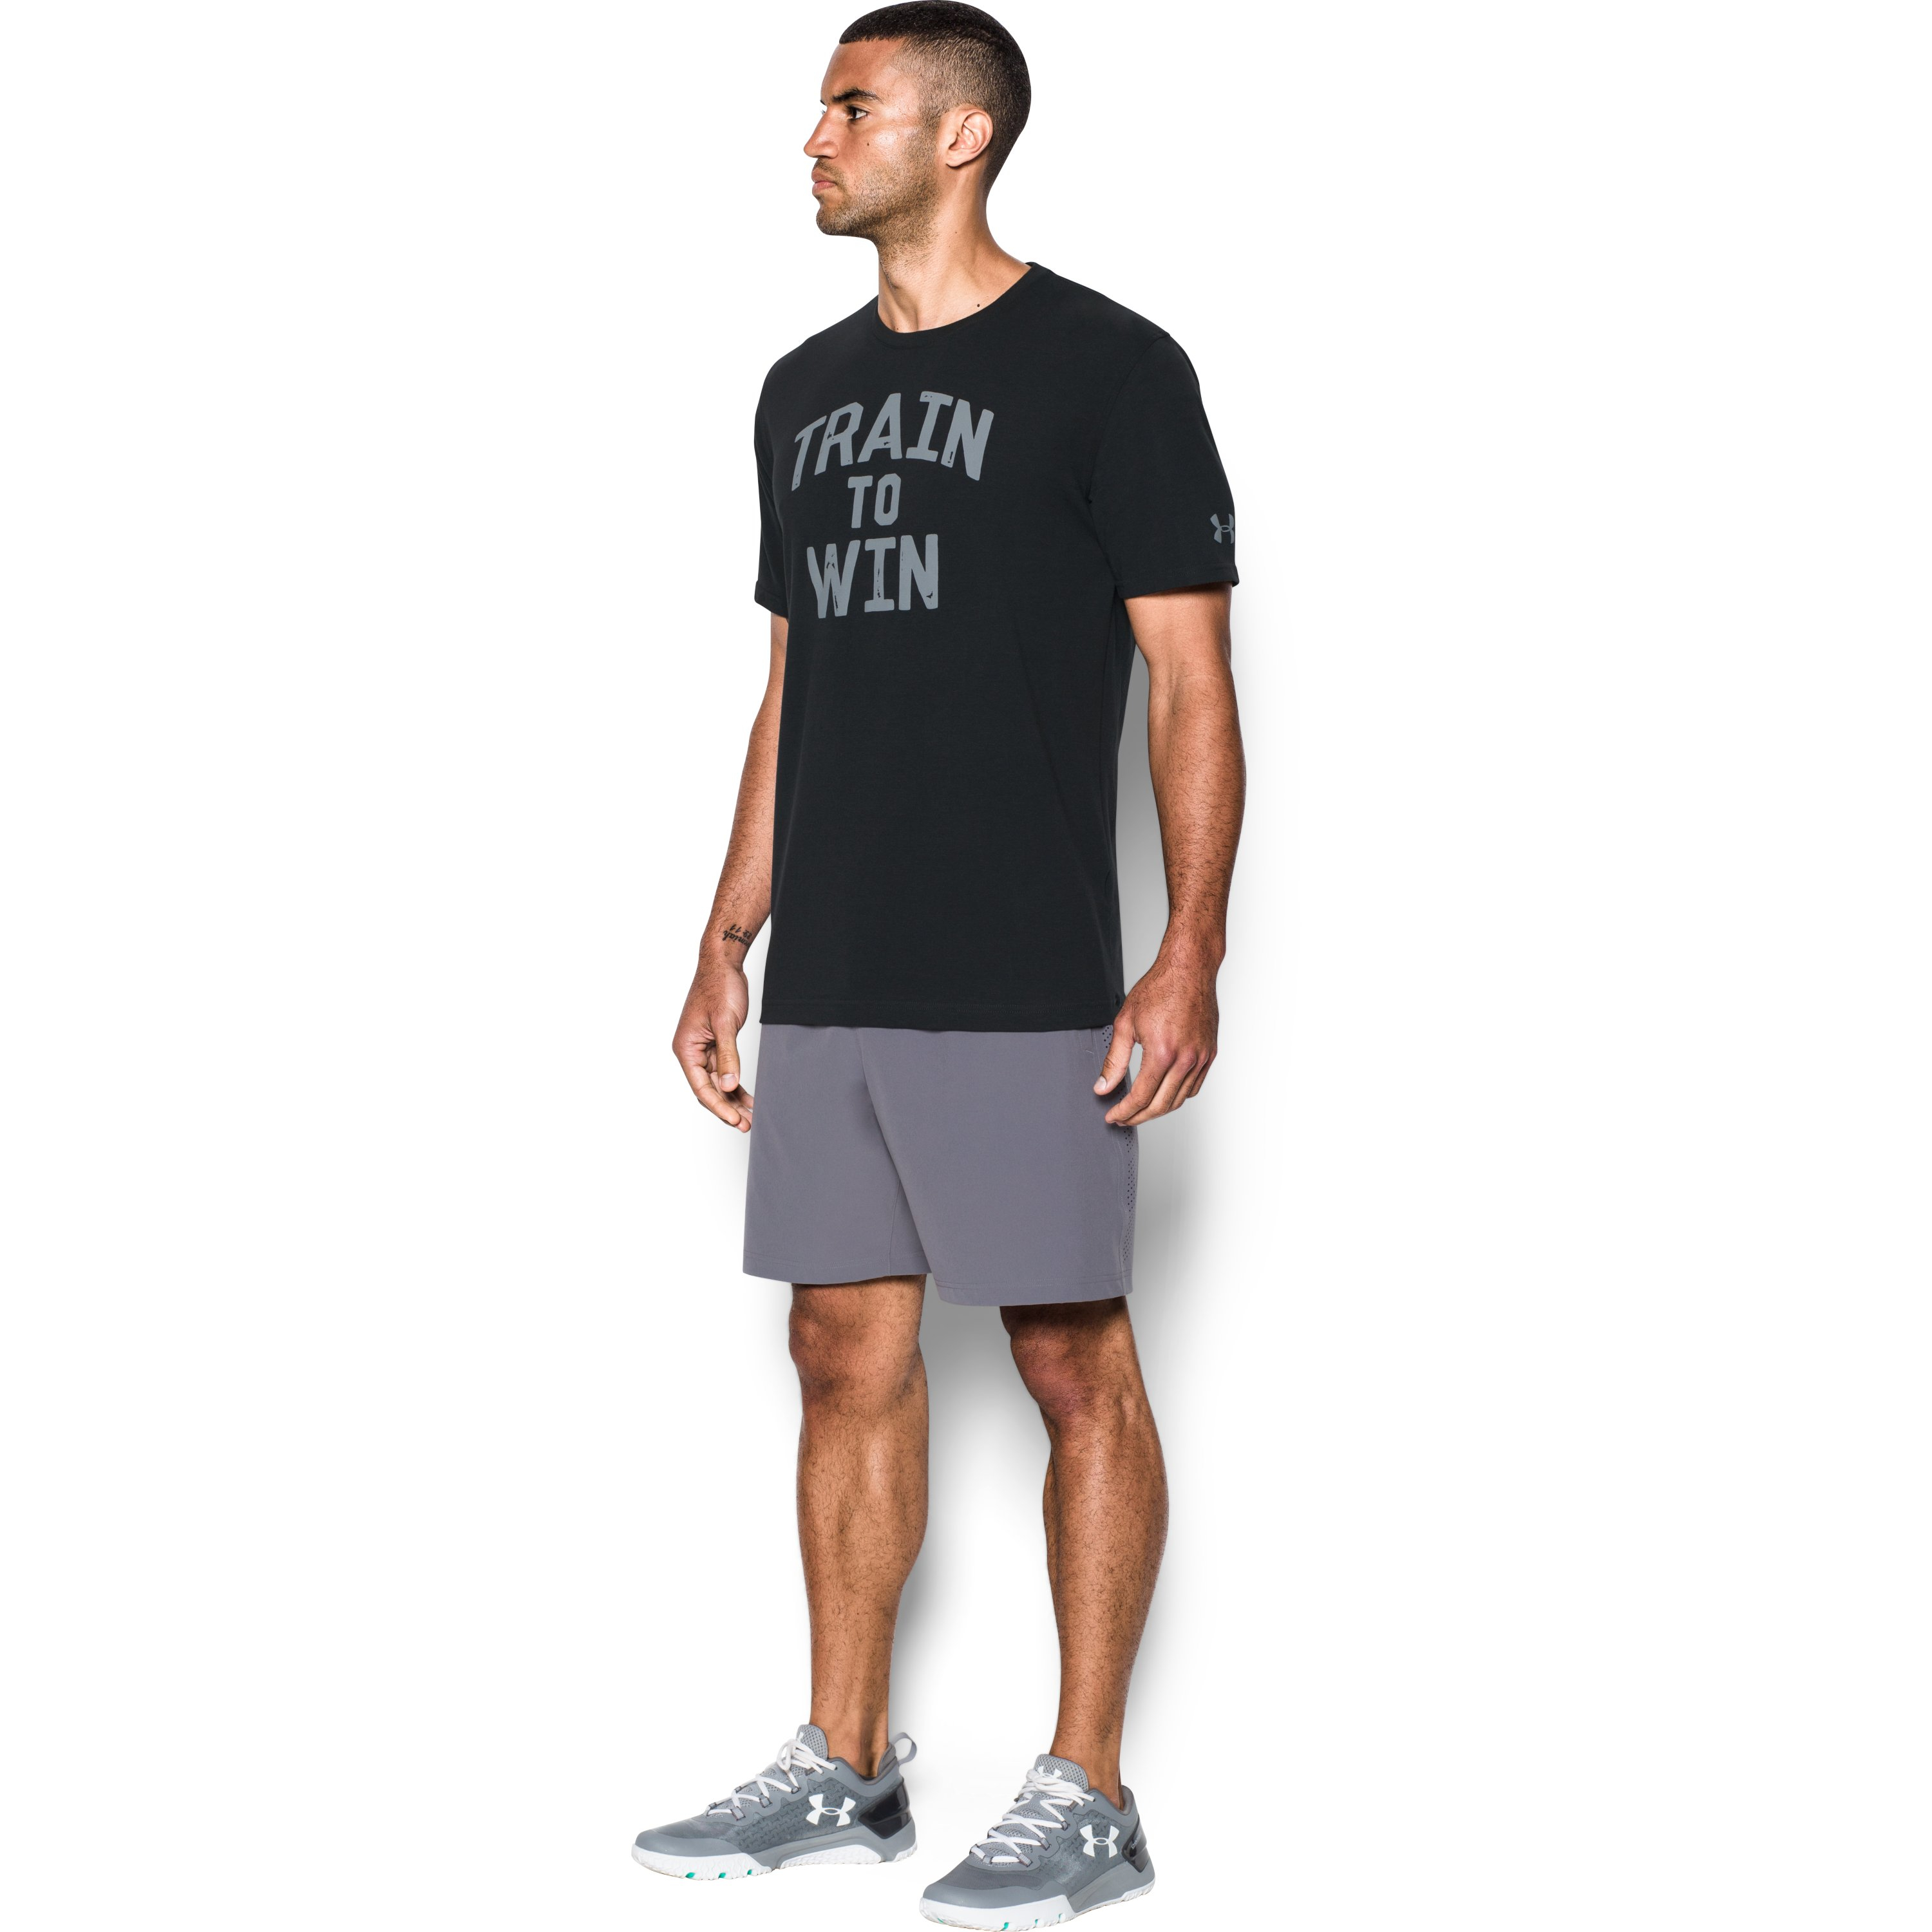 Under Armour Cotton Men's Ua Train To Win T-shirt in Black for Men - Lyst